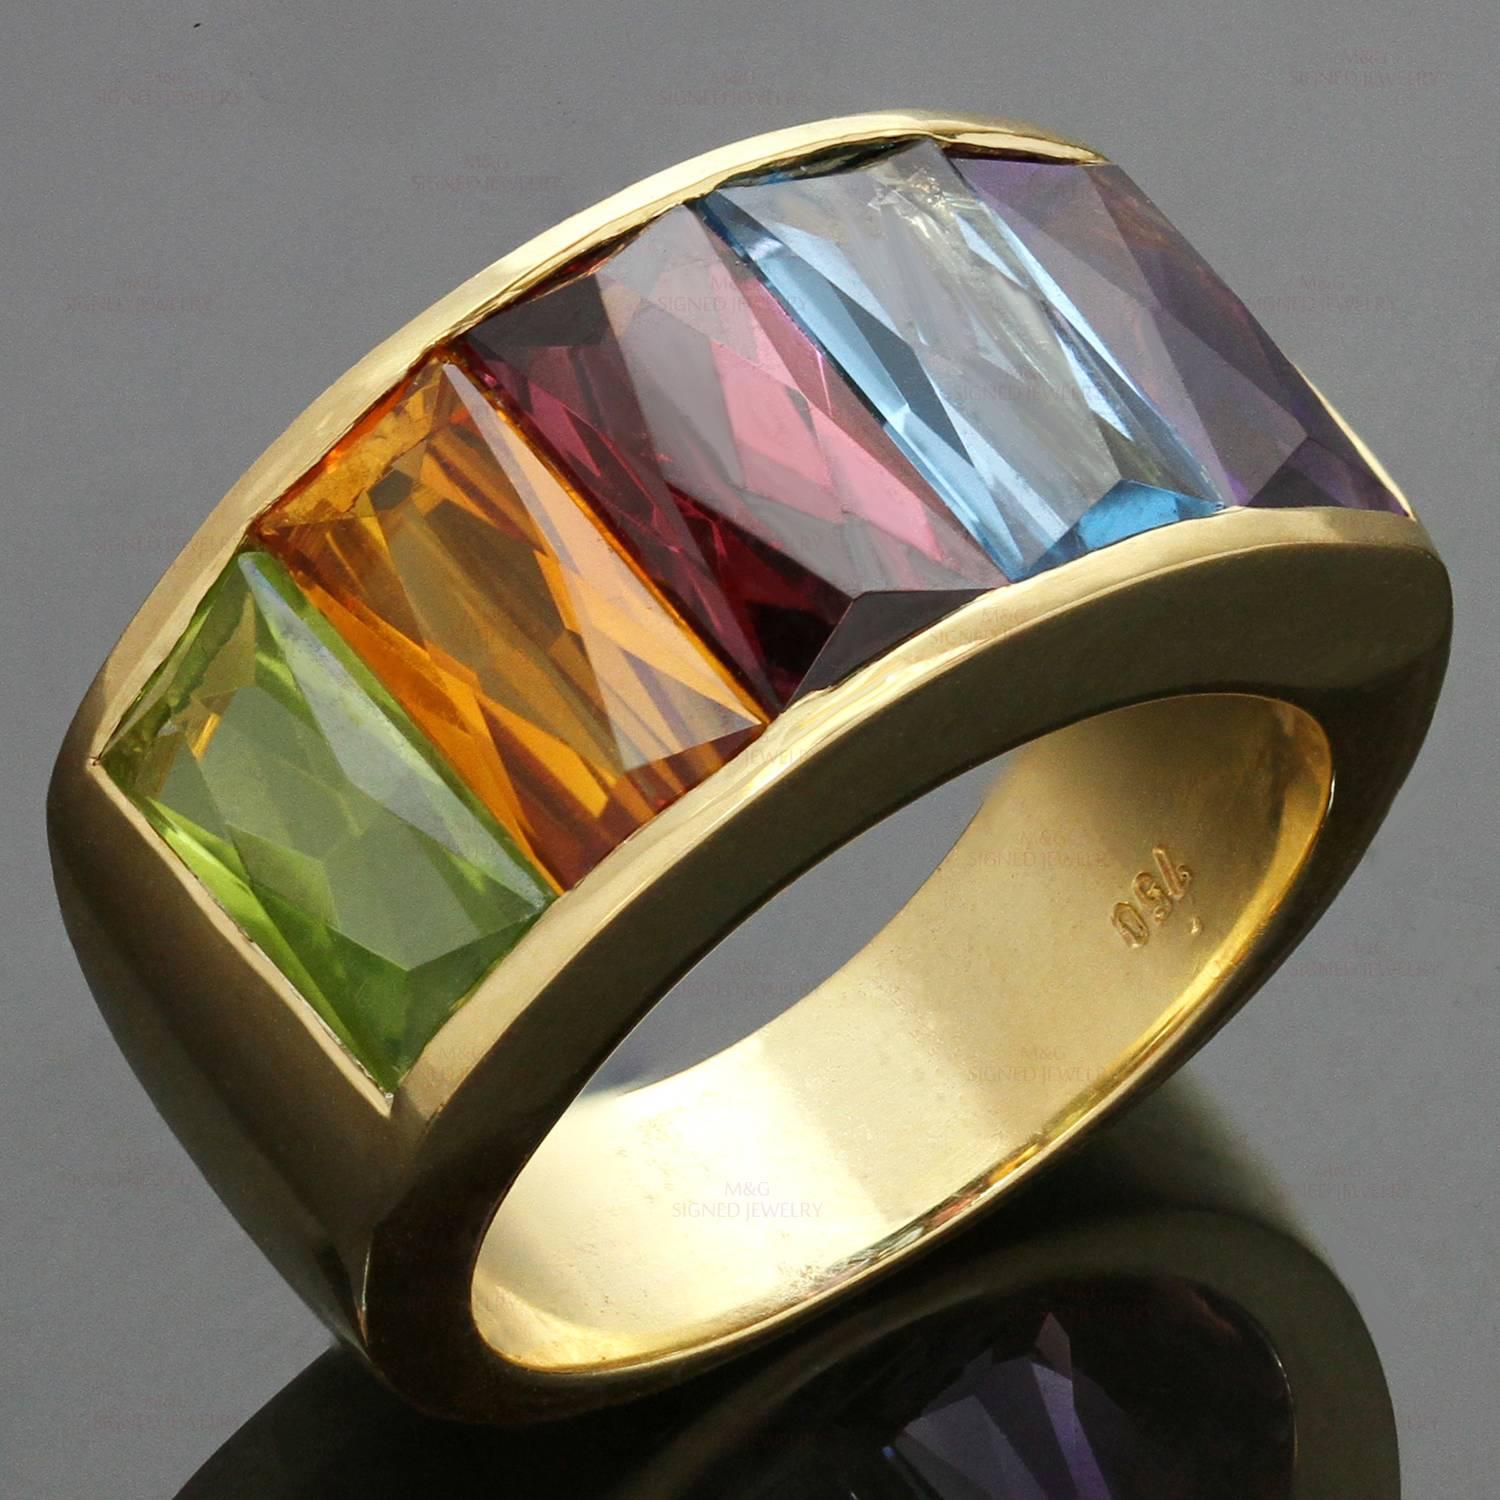 This fabulous H. Stern ring crafted in 18k yellow gold and set with a colorful gradient of faceted rectangular-cut gemstones of an estimated 7.50 carats - amethyst, blue topaz, peridot, citrine, and garnet. Seven stones are abraded. No makers mark,